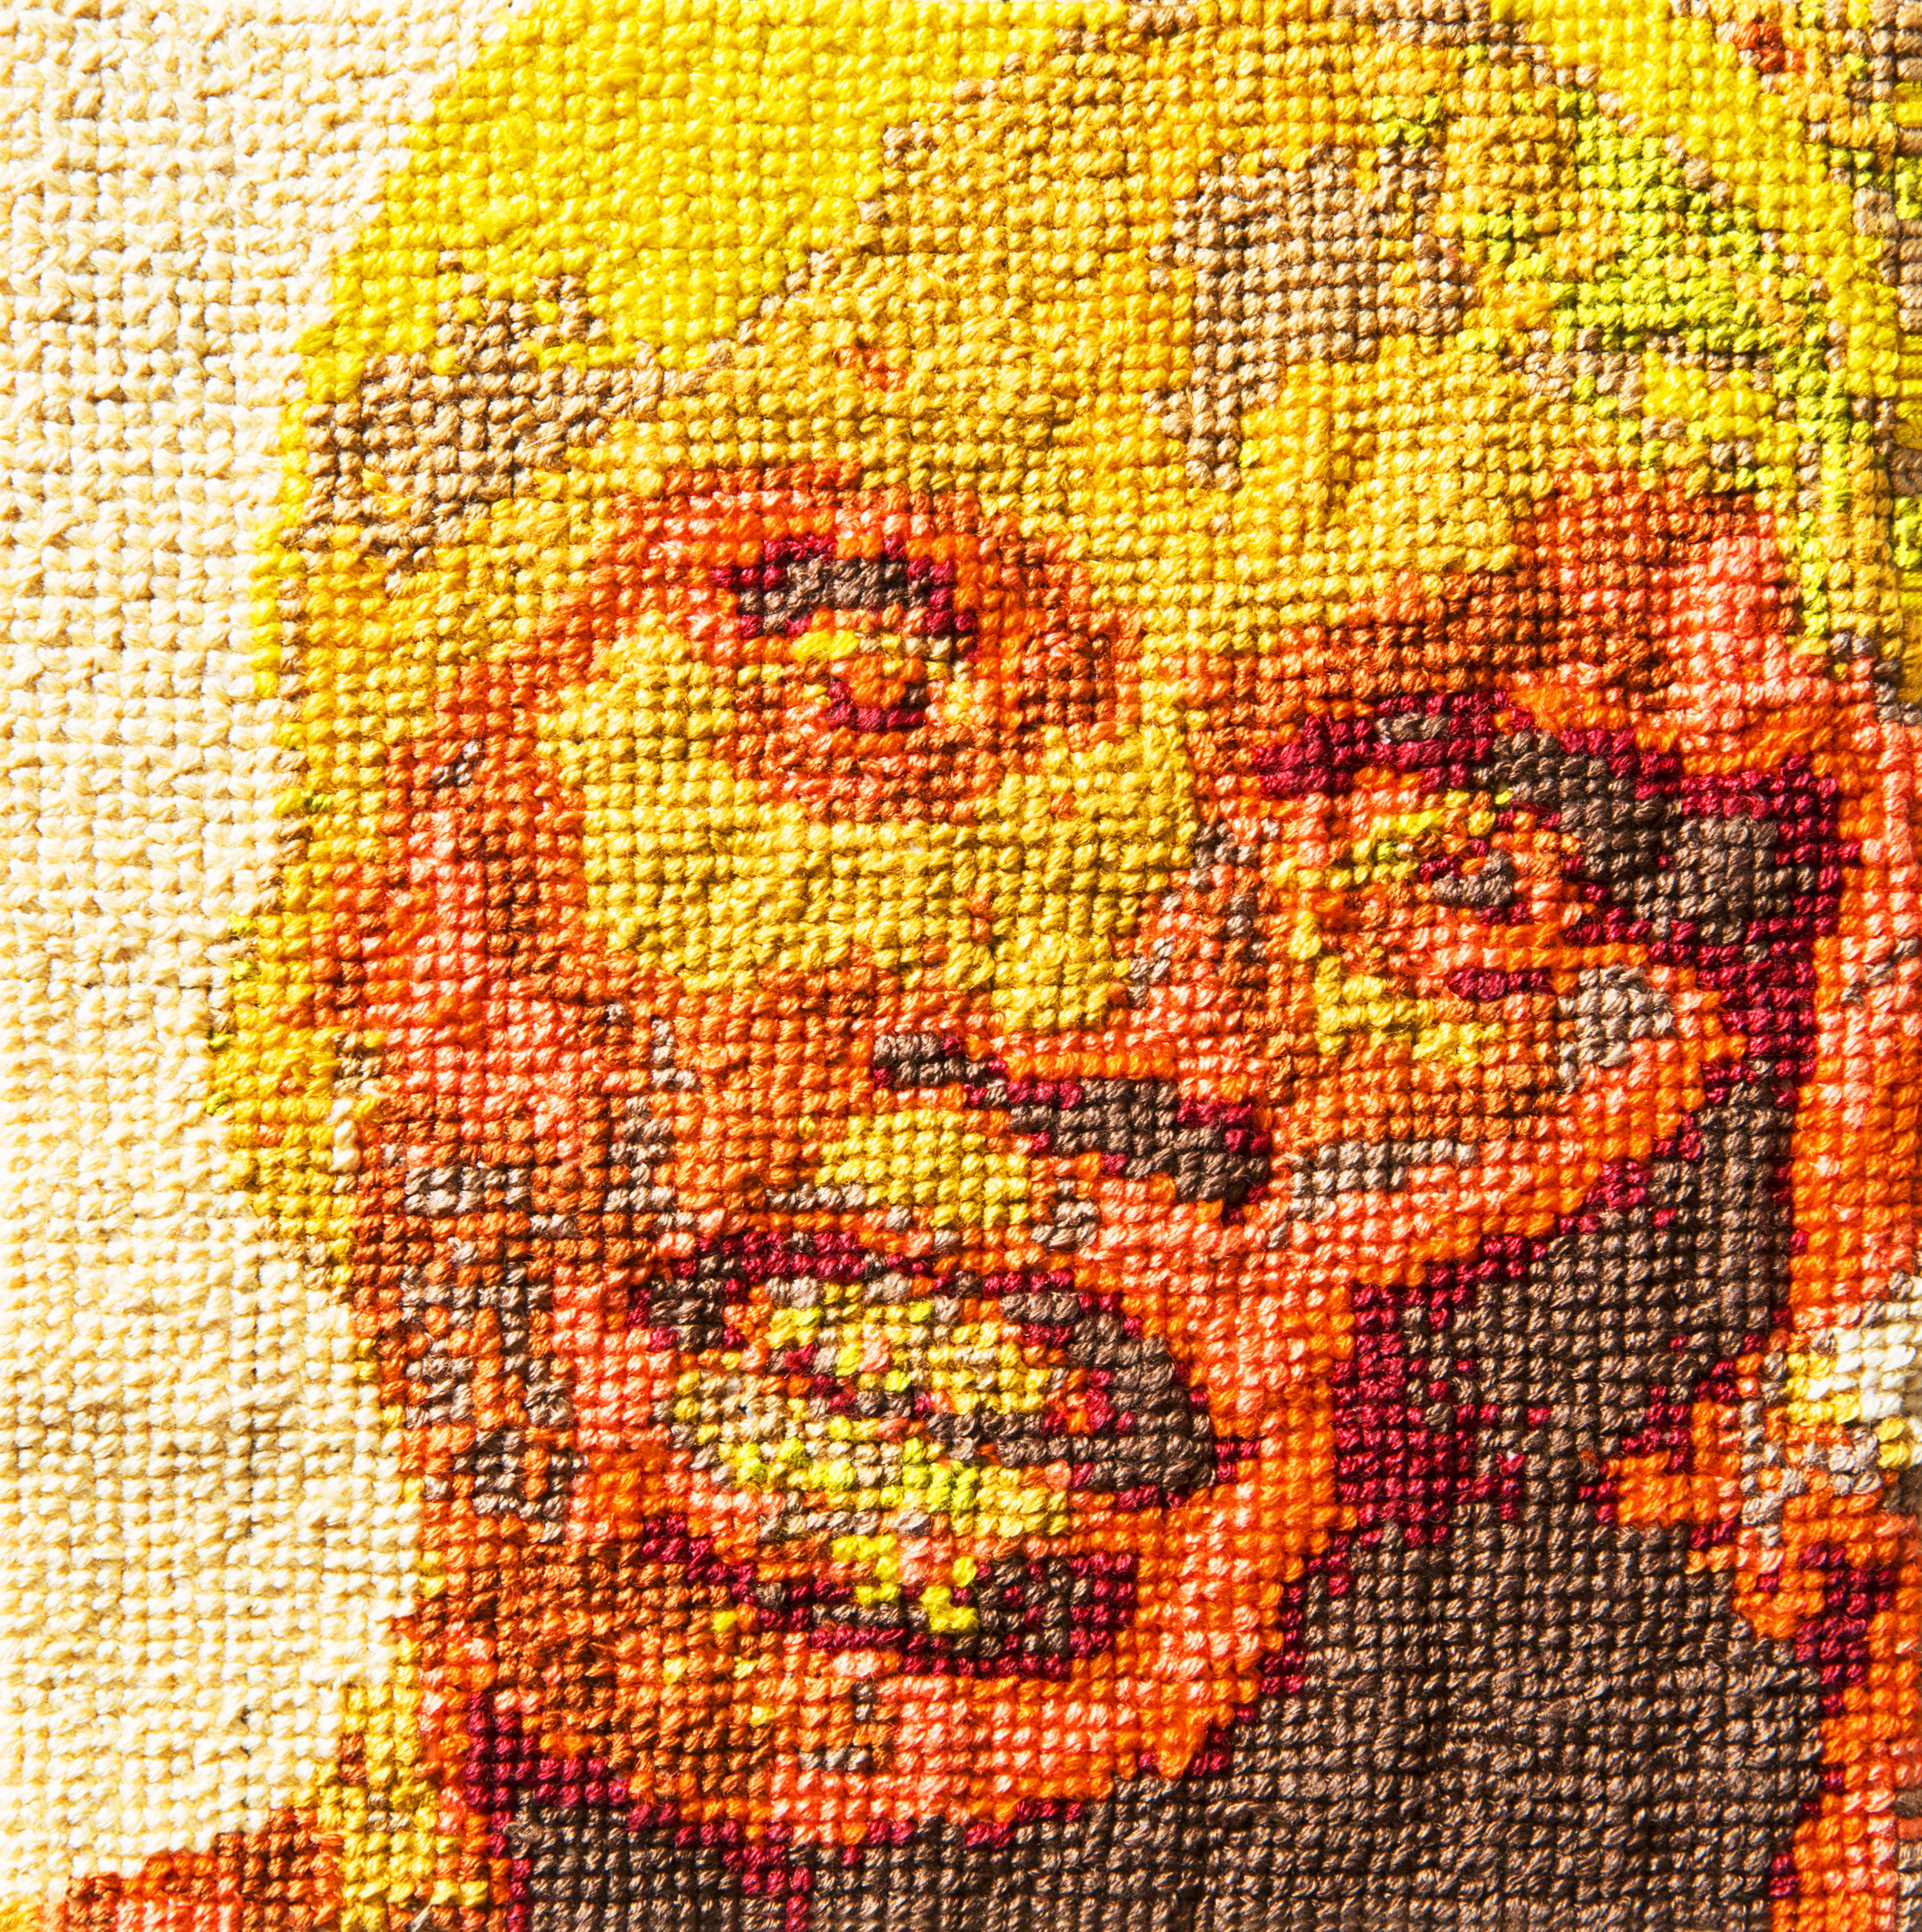   Frame 33   By Christina León and Hester Starnes  5 x 5 inches  Cotton thread on aida cloth  2013 